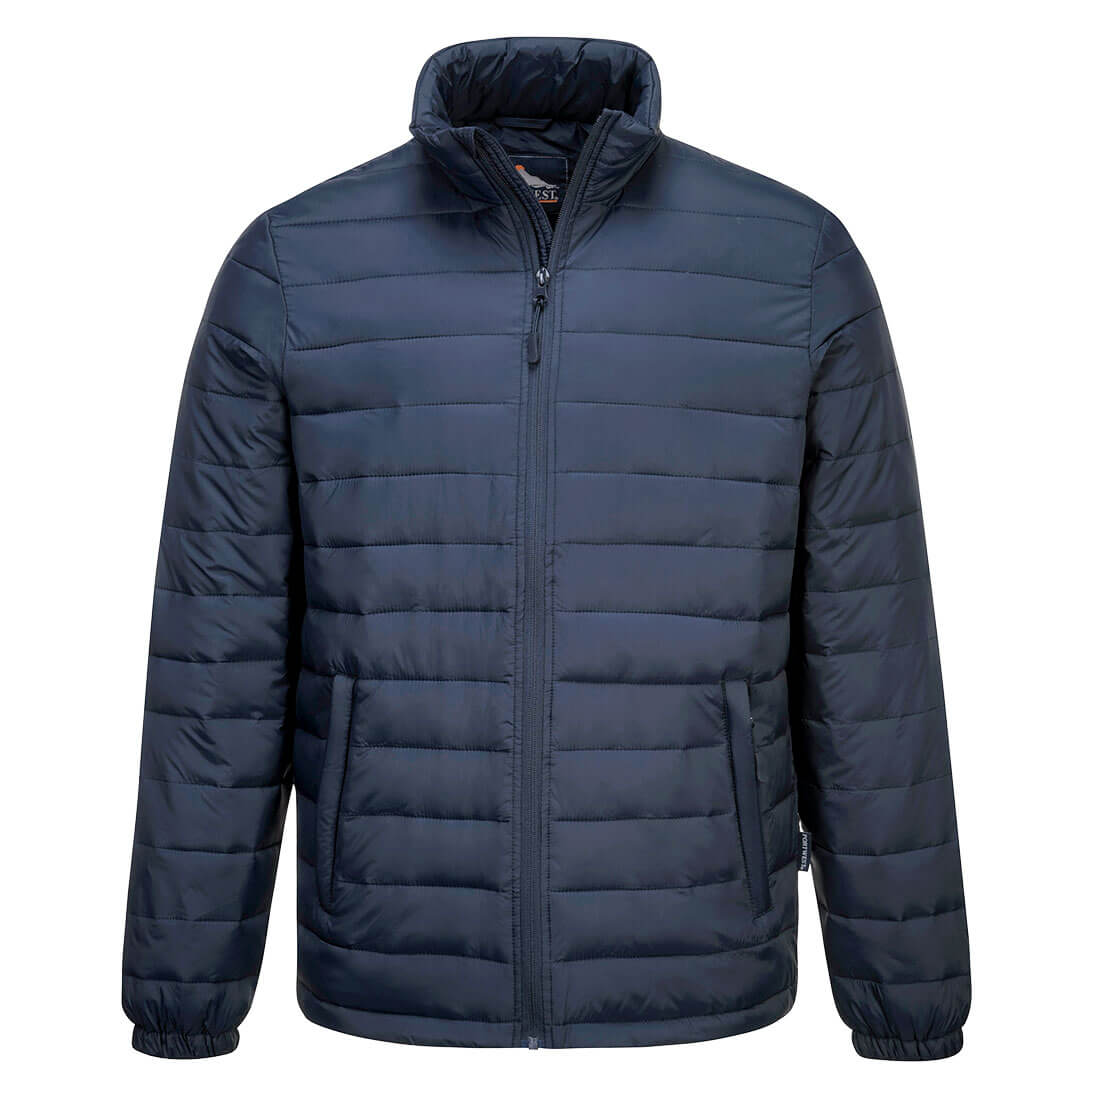 All Weather Protection, Baffle Jackets